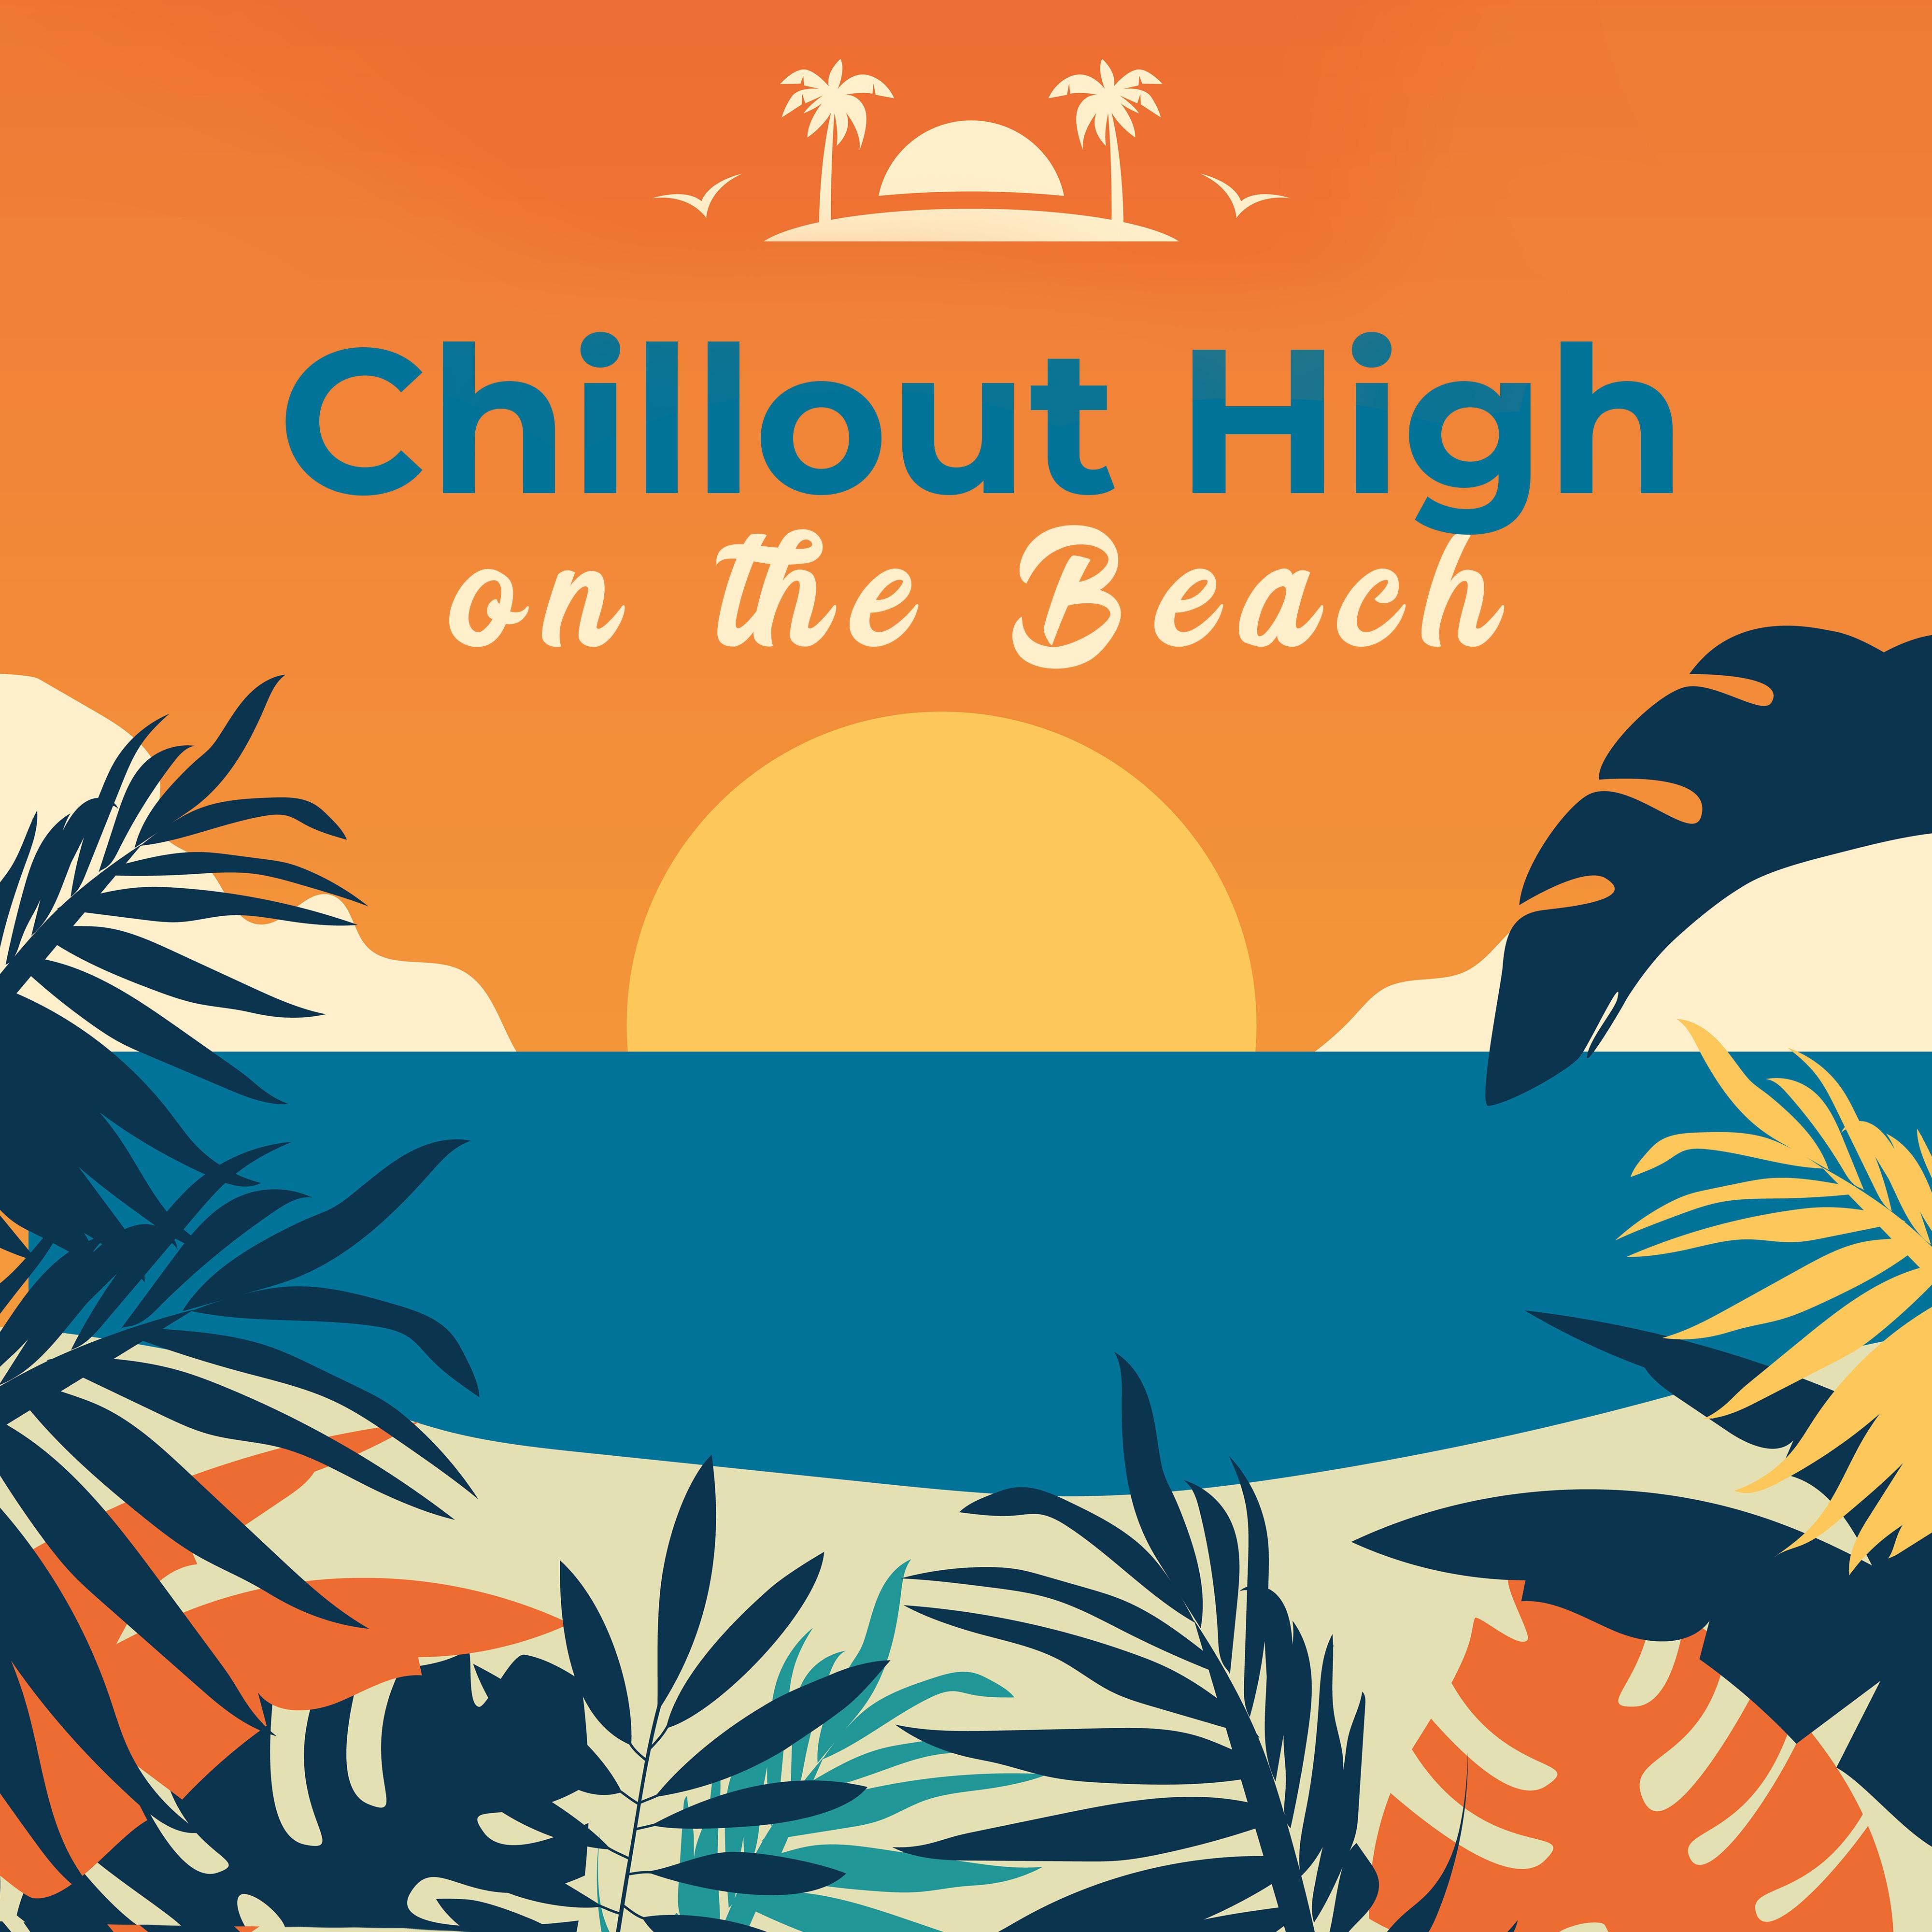 Chillout High on the Beach  2019 Chill Out Music Selection fot Holiday Summer Time Spending, Beach Relax Vibes, Sunny Morning Melodies, Malibu Beach Beats